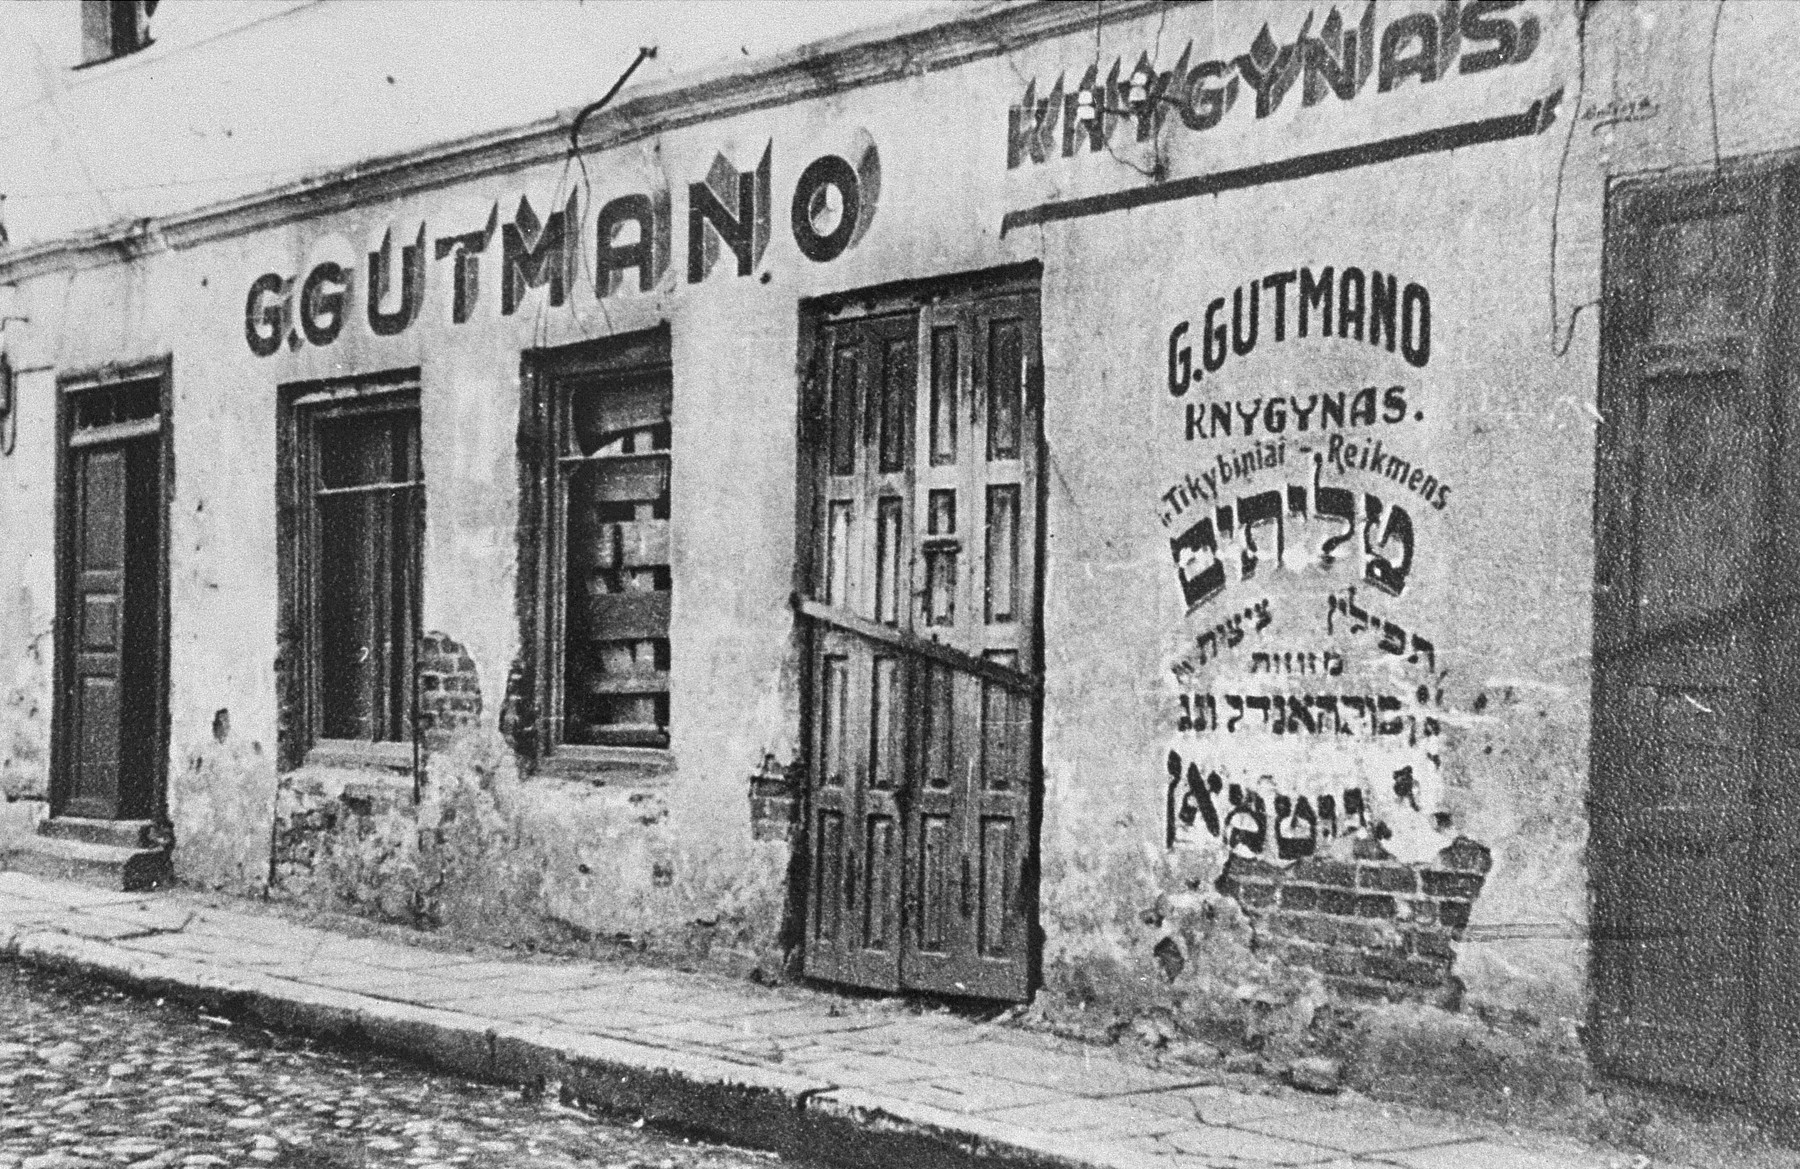 View of a destroyed building in Kovno which housed the G. Gutman Judaica store.